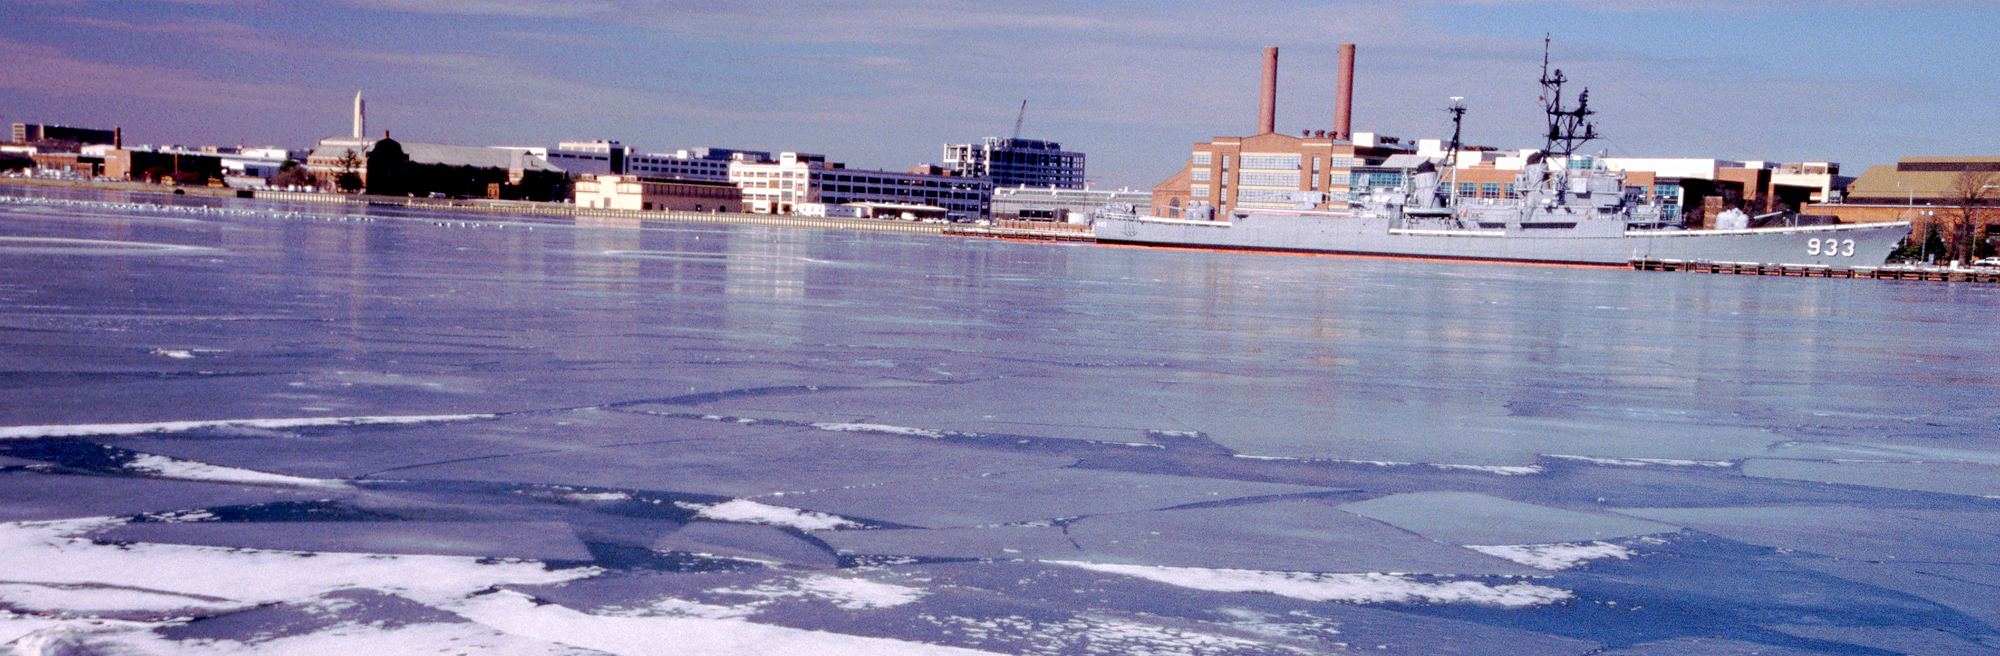 An image of an icy river. A large military ship is in the background.